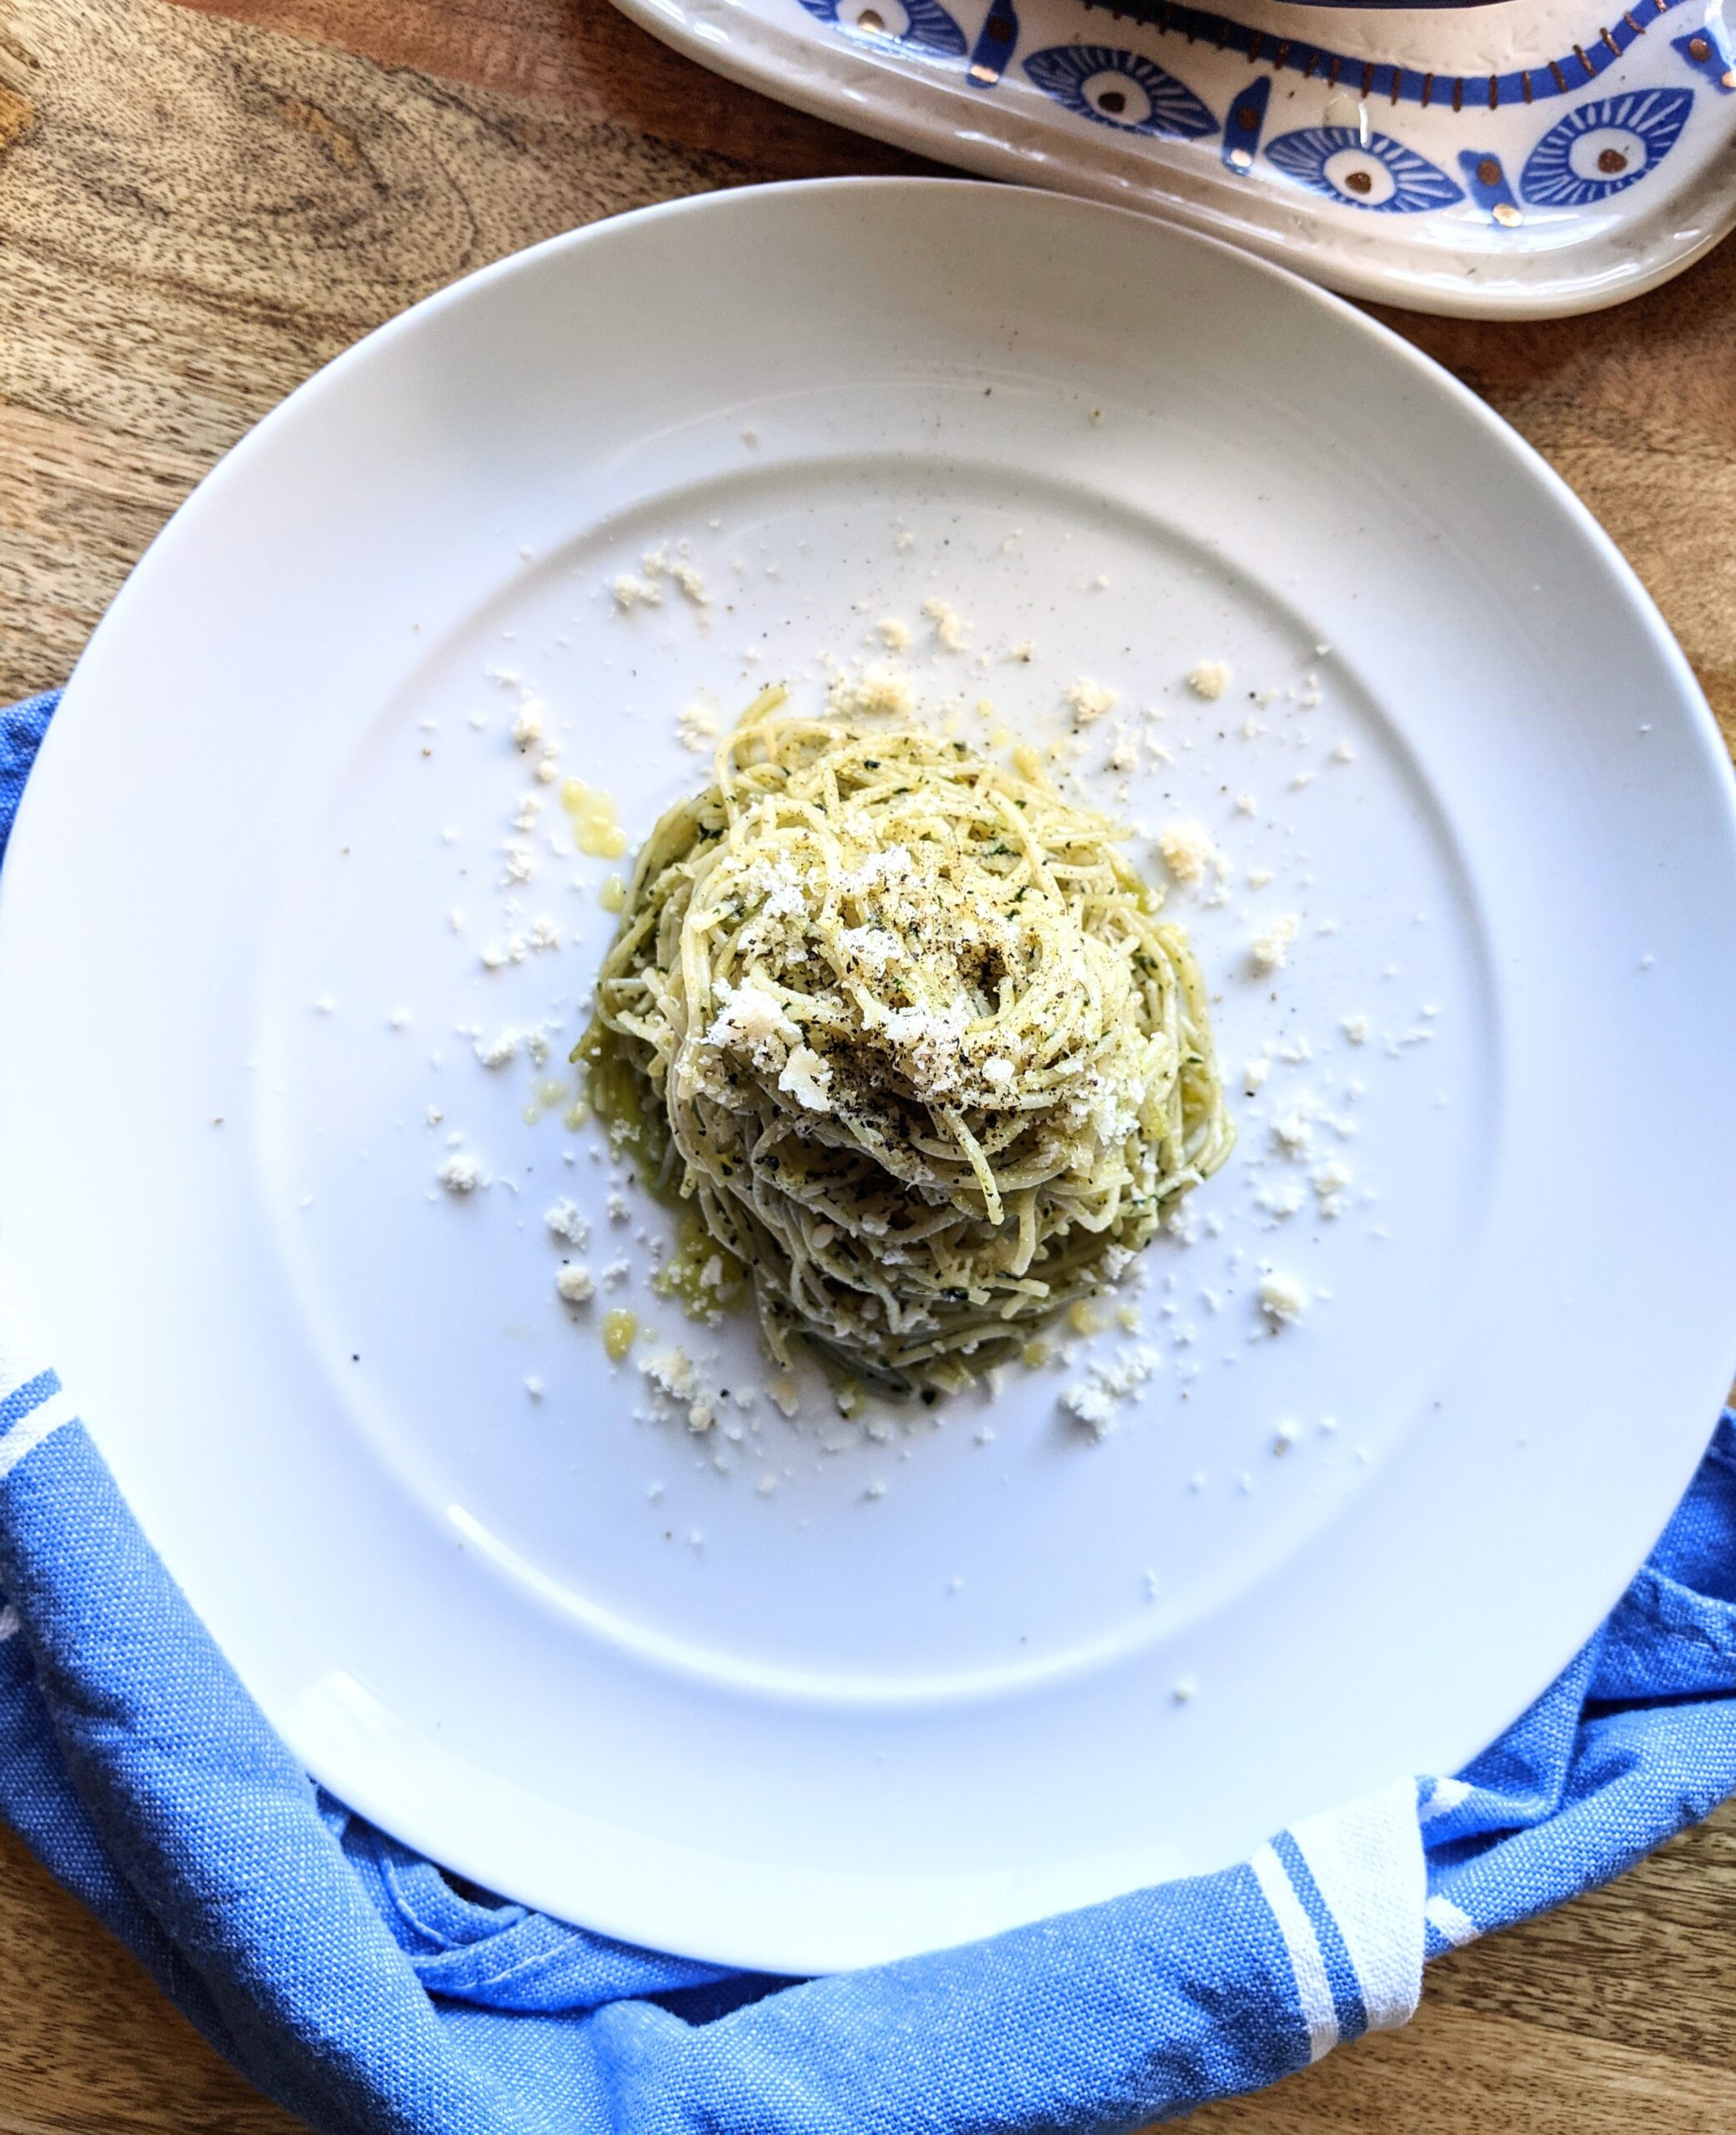 Herbaceous fresh basil pesto tossed with al dente spaghetti and then twisted into a little nest in the center of a large white plate. Garnished with heaps of freshly grated Parmigiano Reggiano.